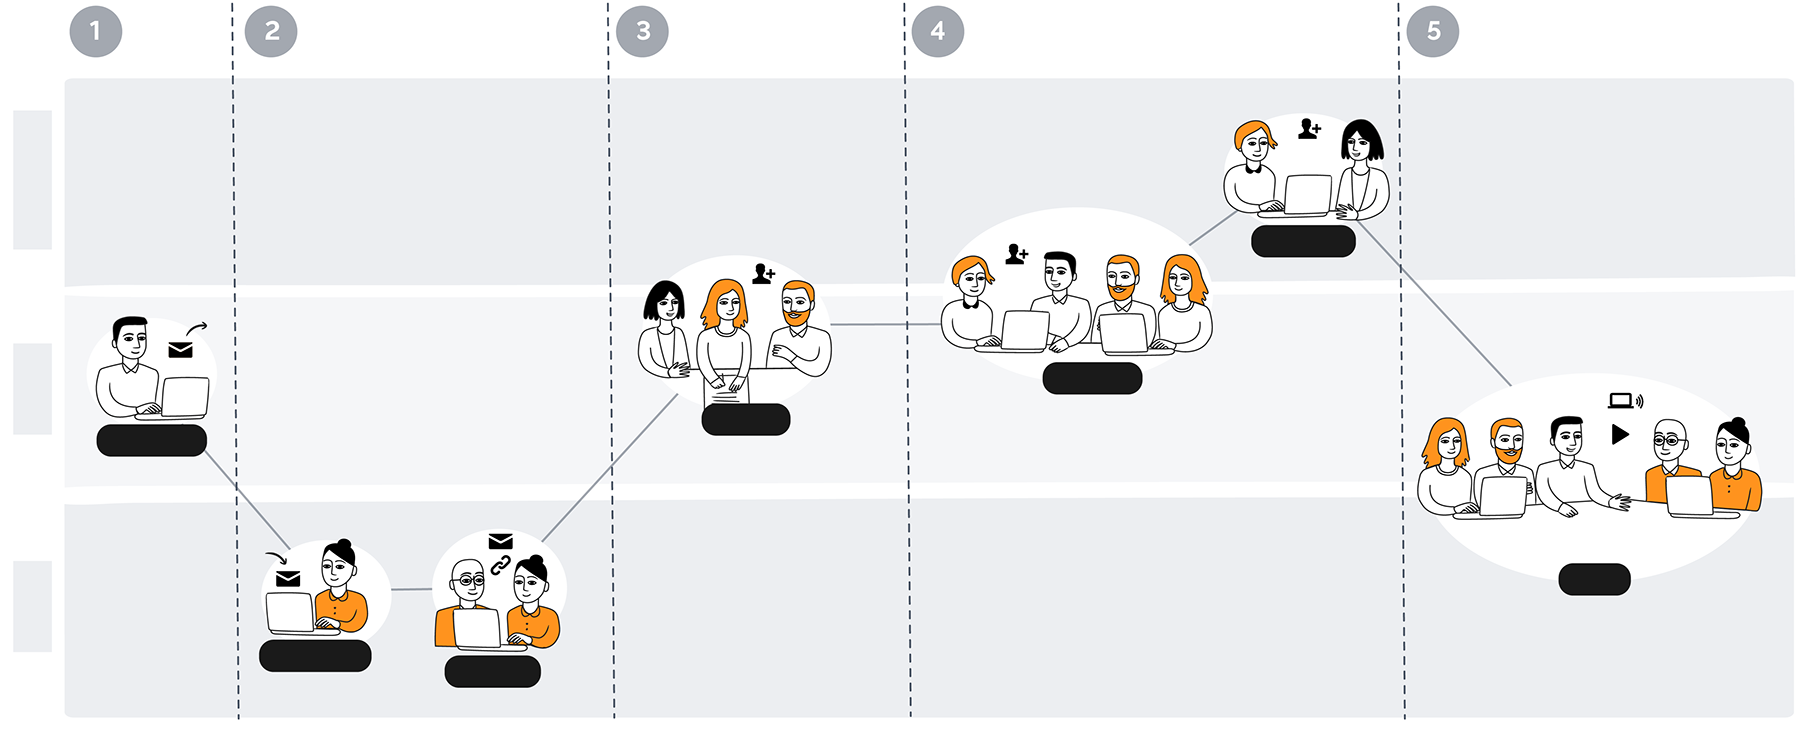 the user journey of sharing a prezi